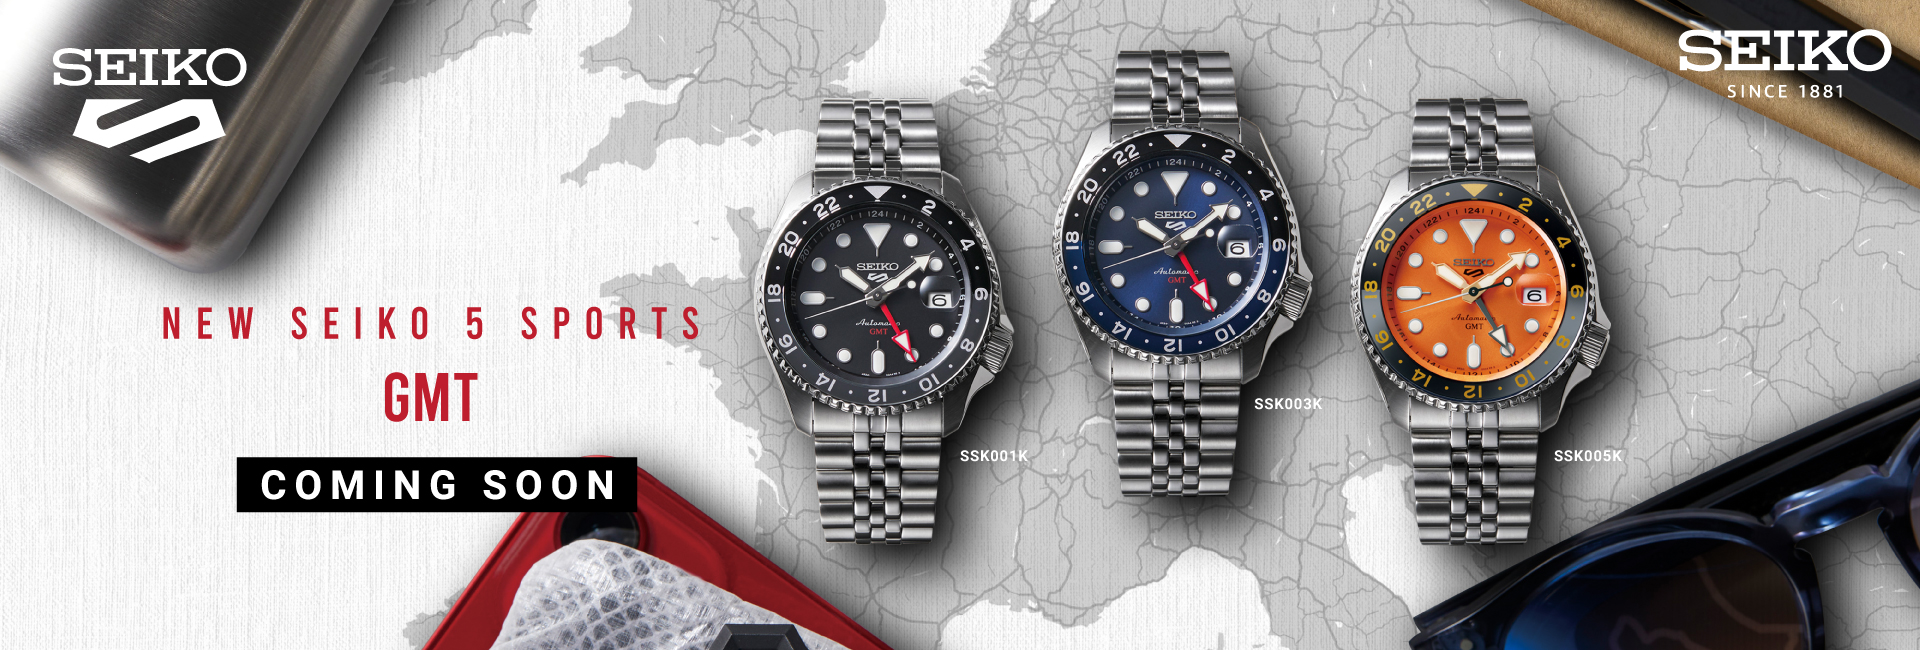 32-Banner-New-Seiko-5-Sports-GMT-Coming-Soon-1920x650